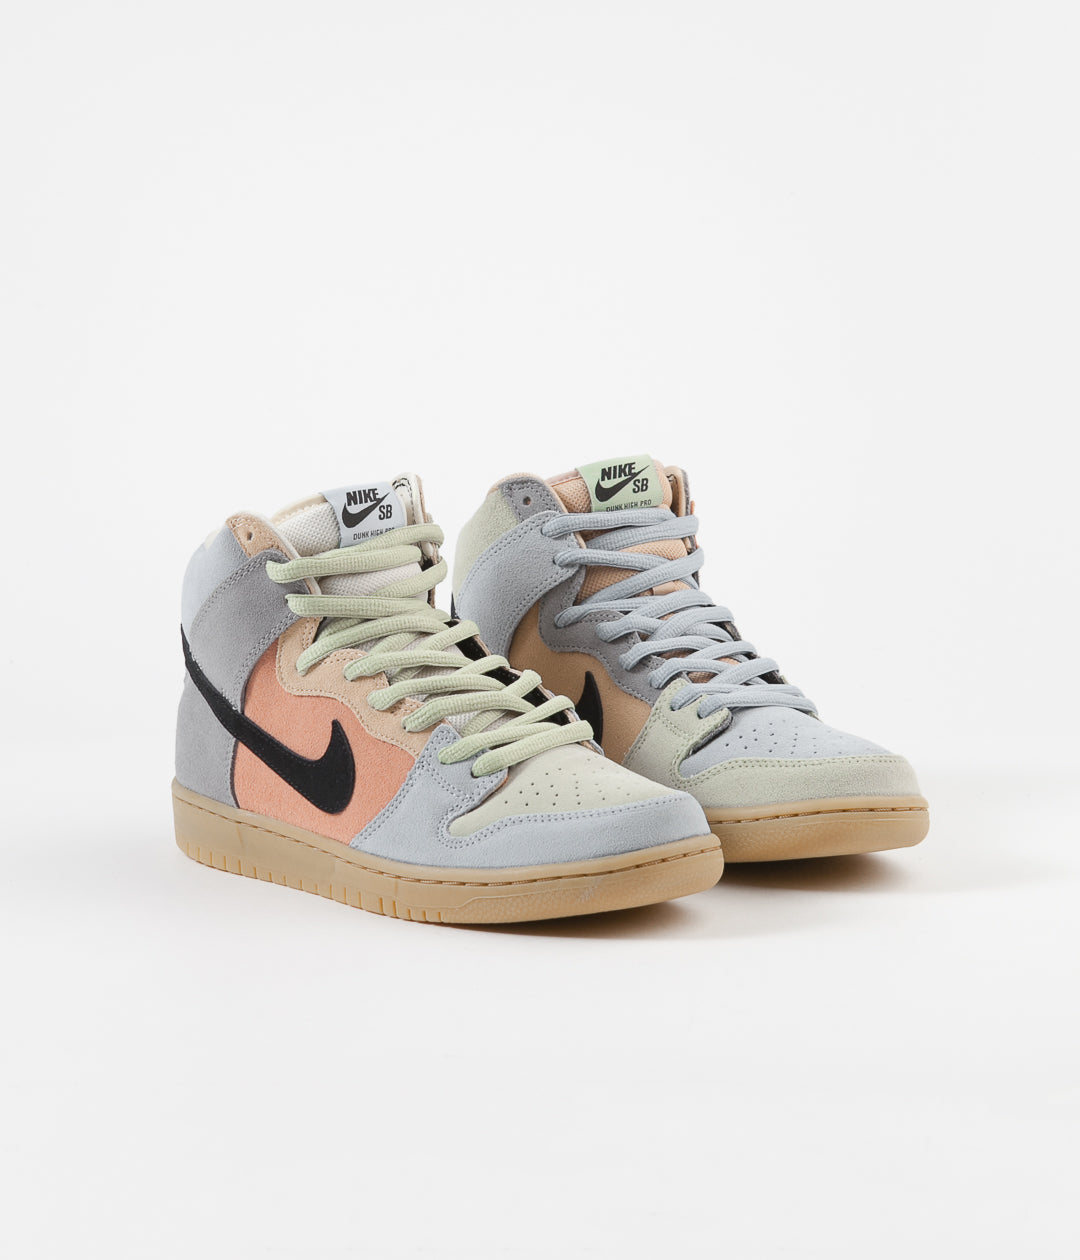 nike sb dunk high pro particle grey